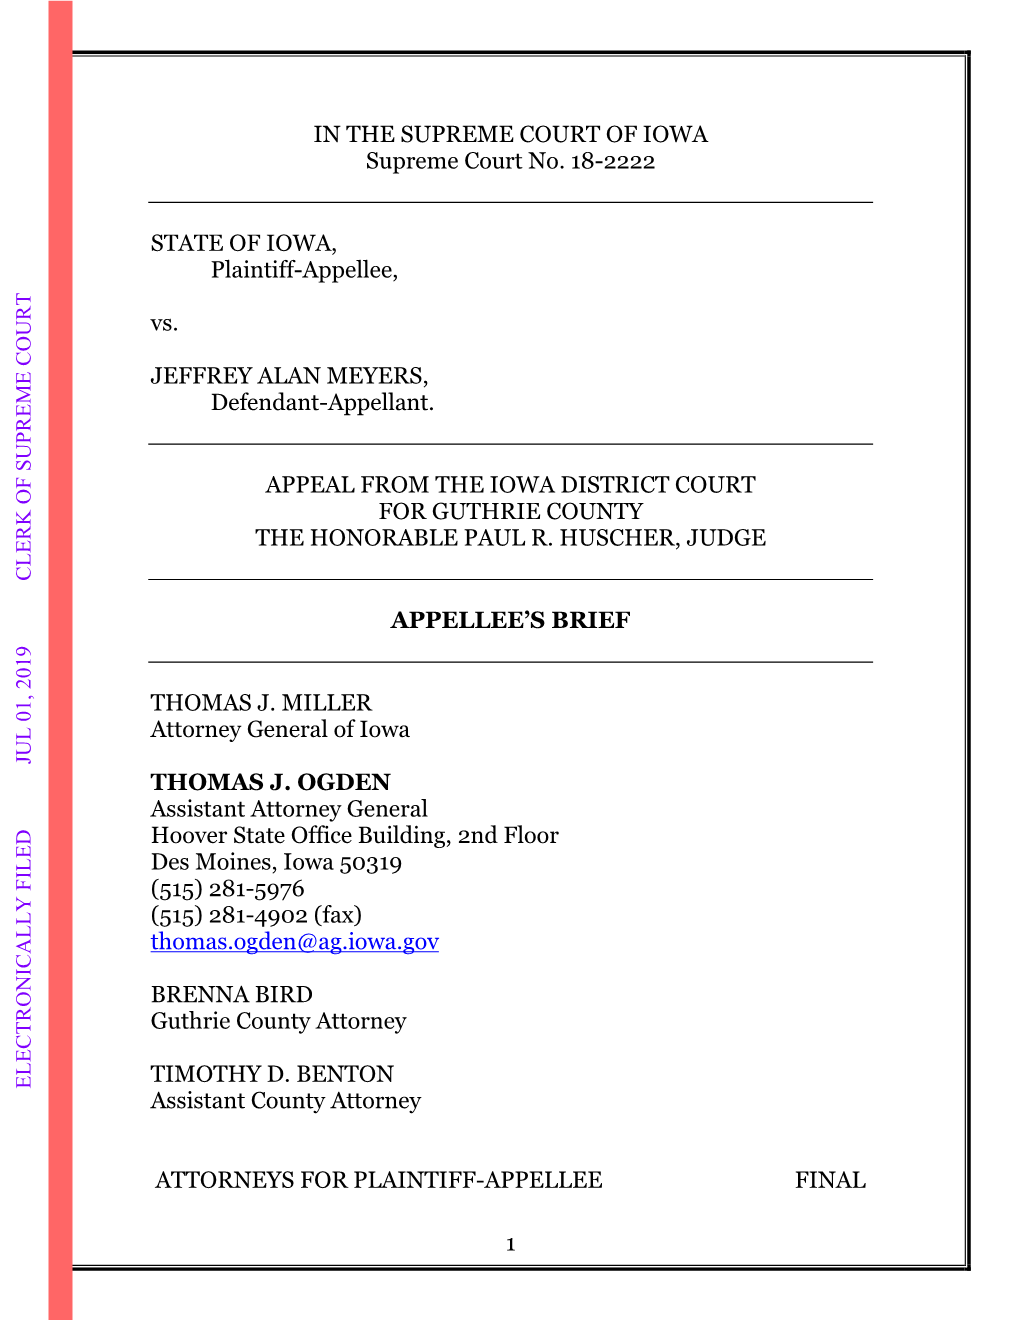 ELECTRONICALLY FILED JUL 01, 2019 CLERK of SUPREME COURT Assistant County Attorney